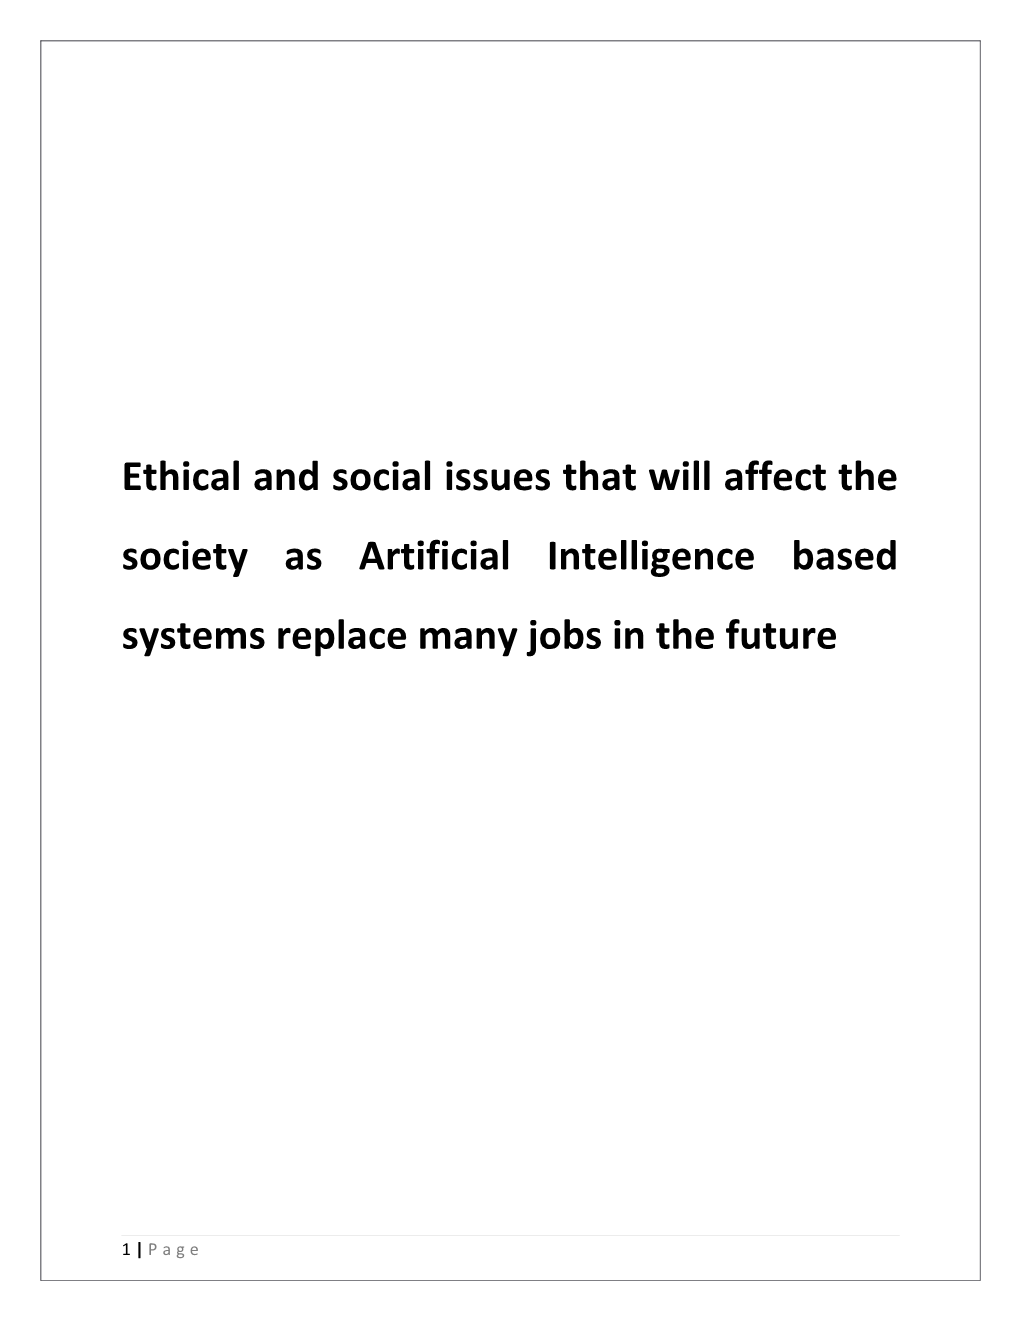 Ethical and Social Issues That Will Affect the Society As Artificialintelligence Based